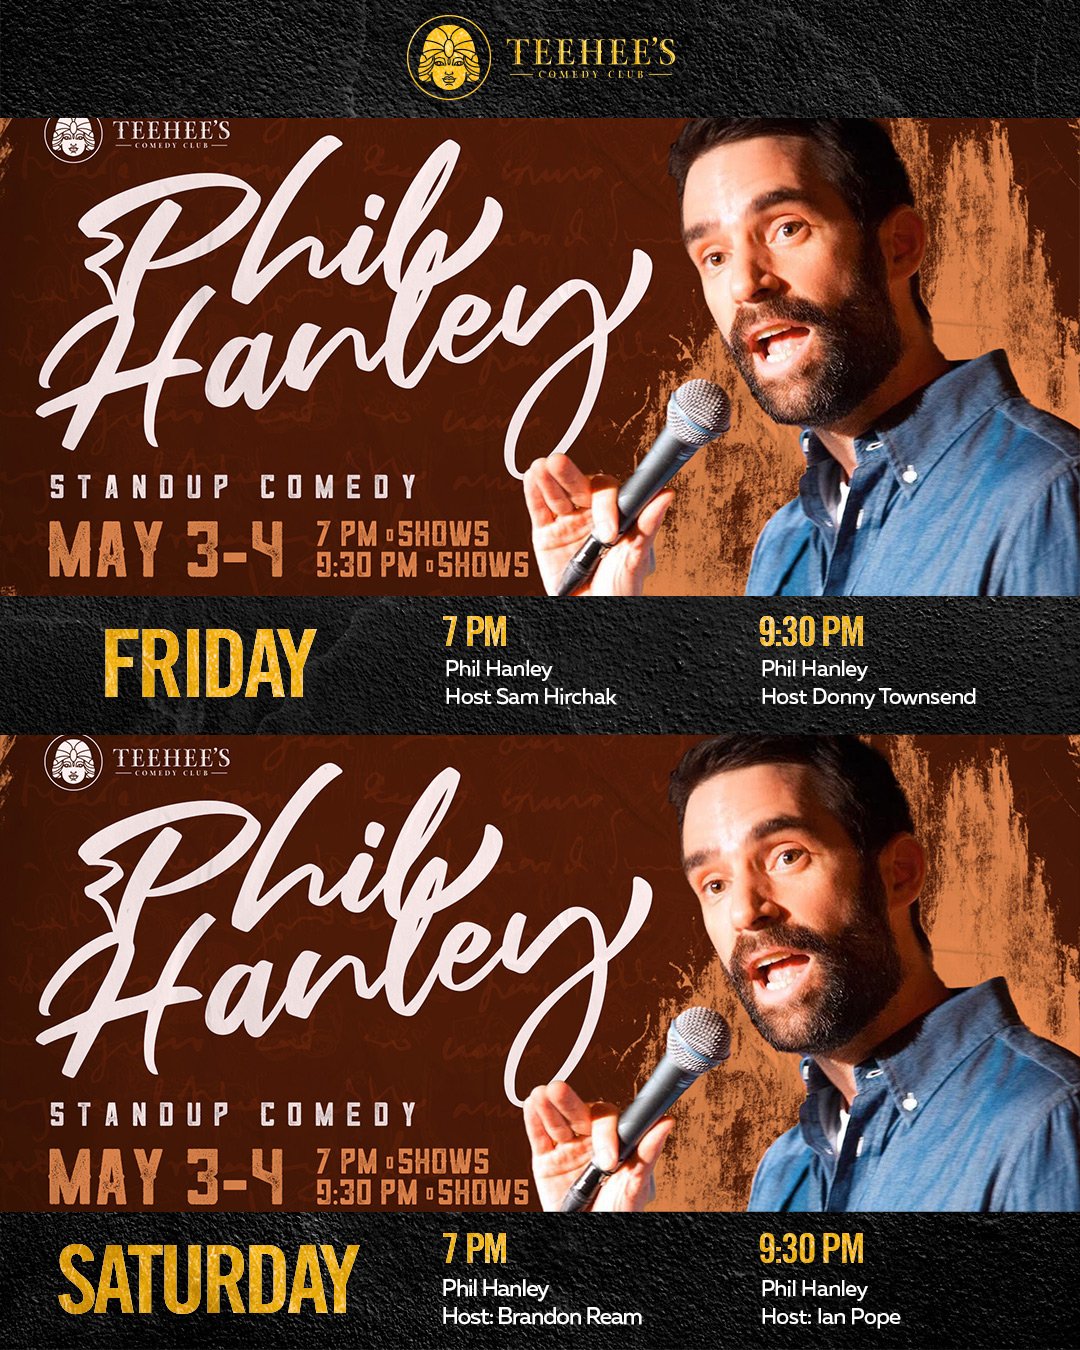 🔥🎤🔥 This weekend is a Phil Hanley party and you're invited!
Get 🎟🎟🎟 at teeheescomedy.com/shows